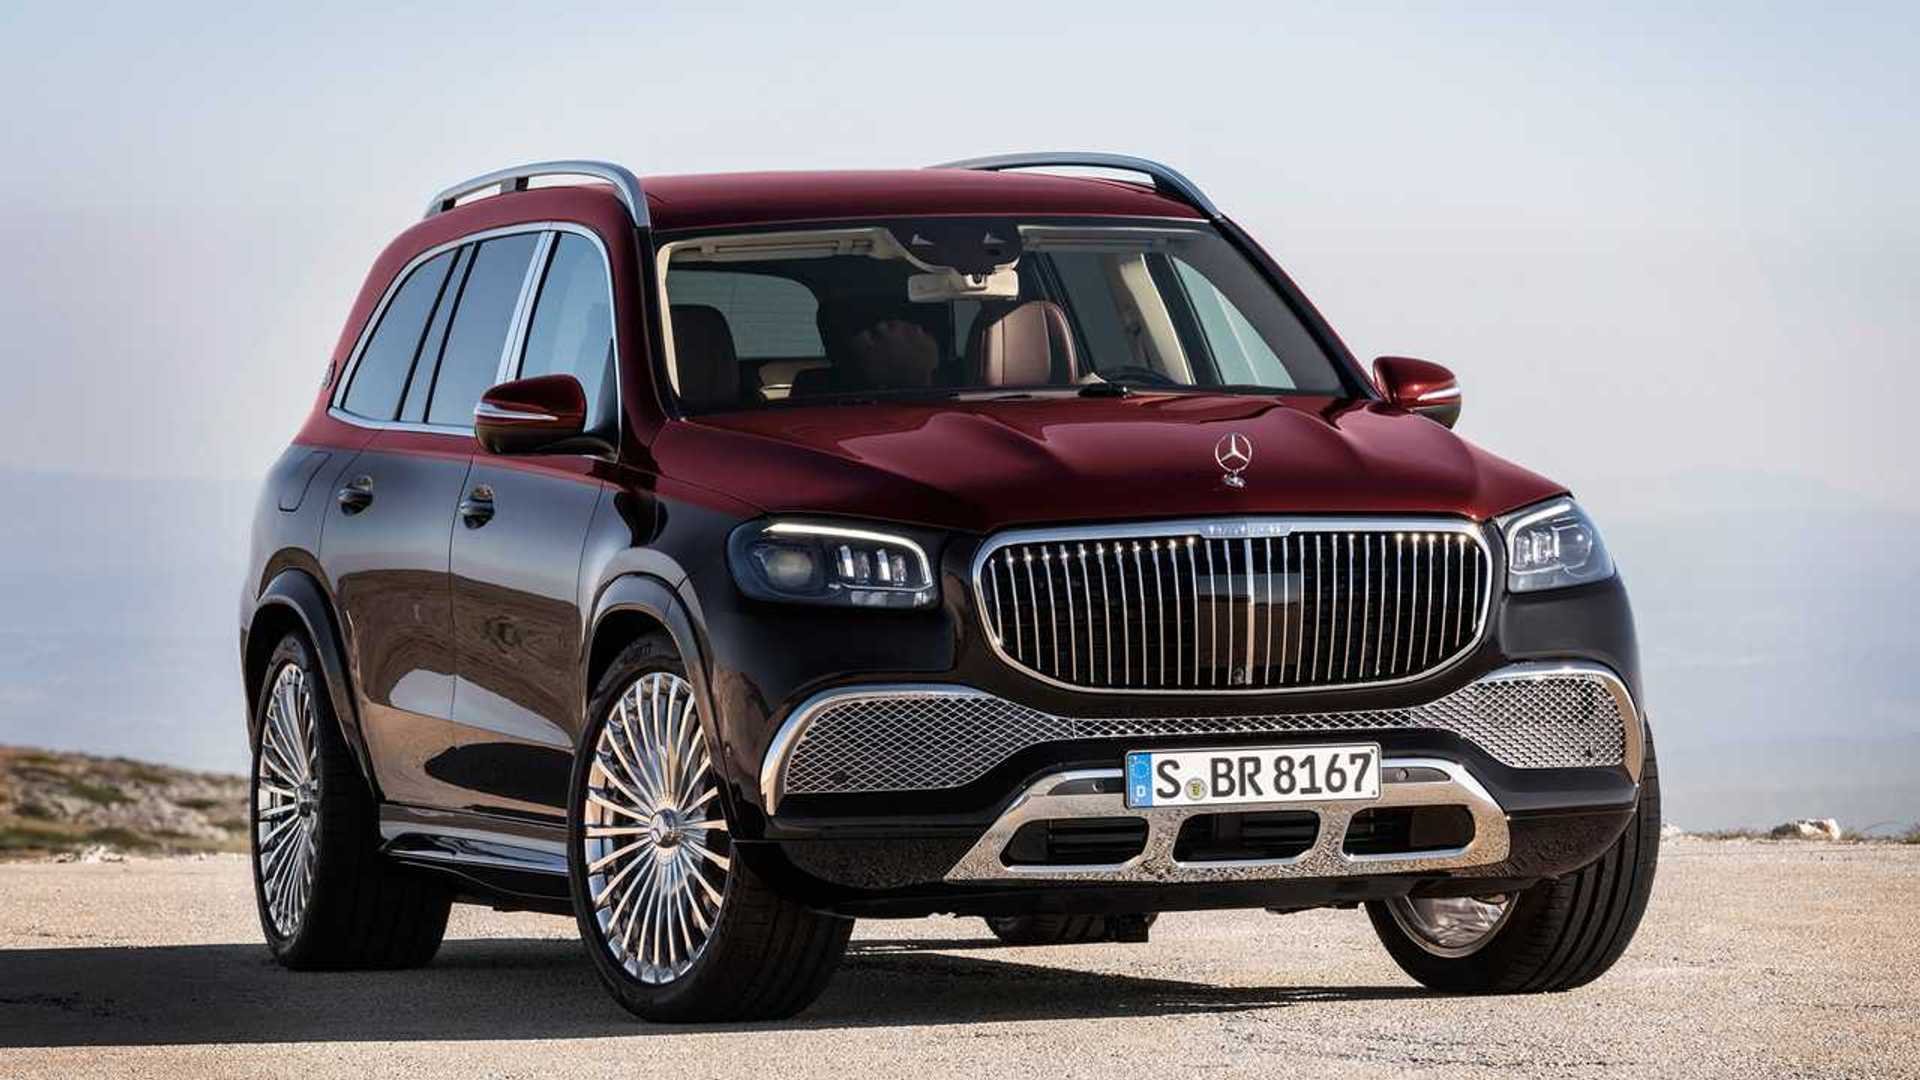 2021 Mercedes-Maybach GLS 600 4Matic Offers Lavish Luxury For $160,500